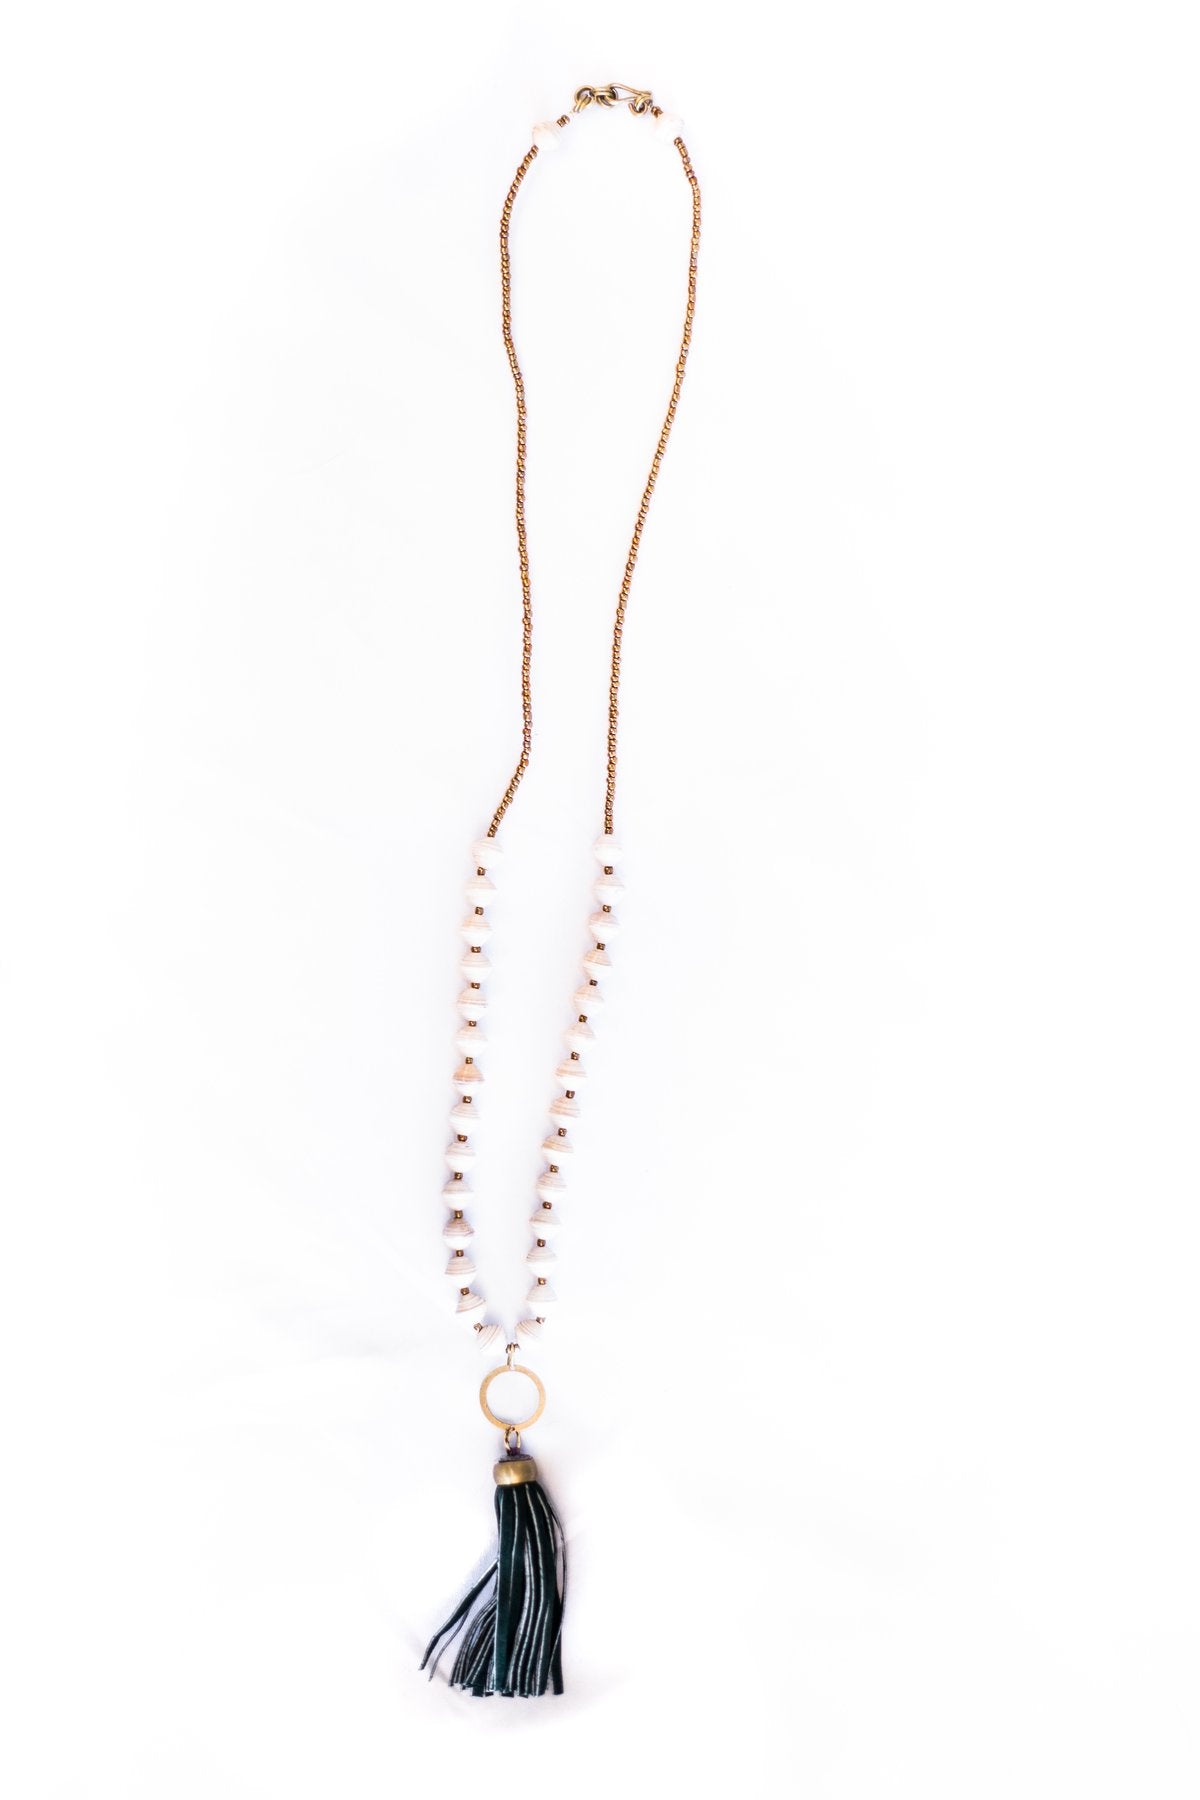 Tassel and Paper Bead Necklace